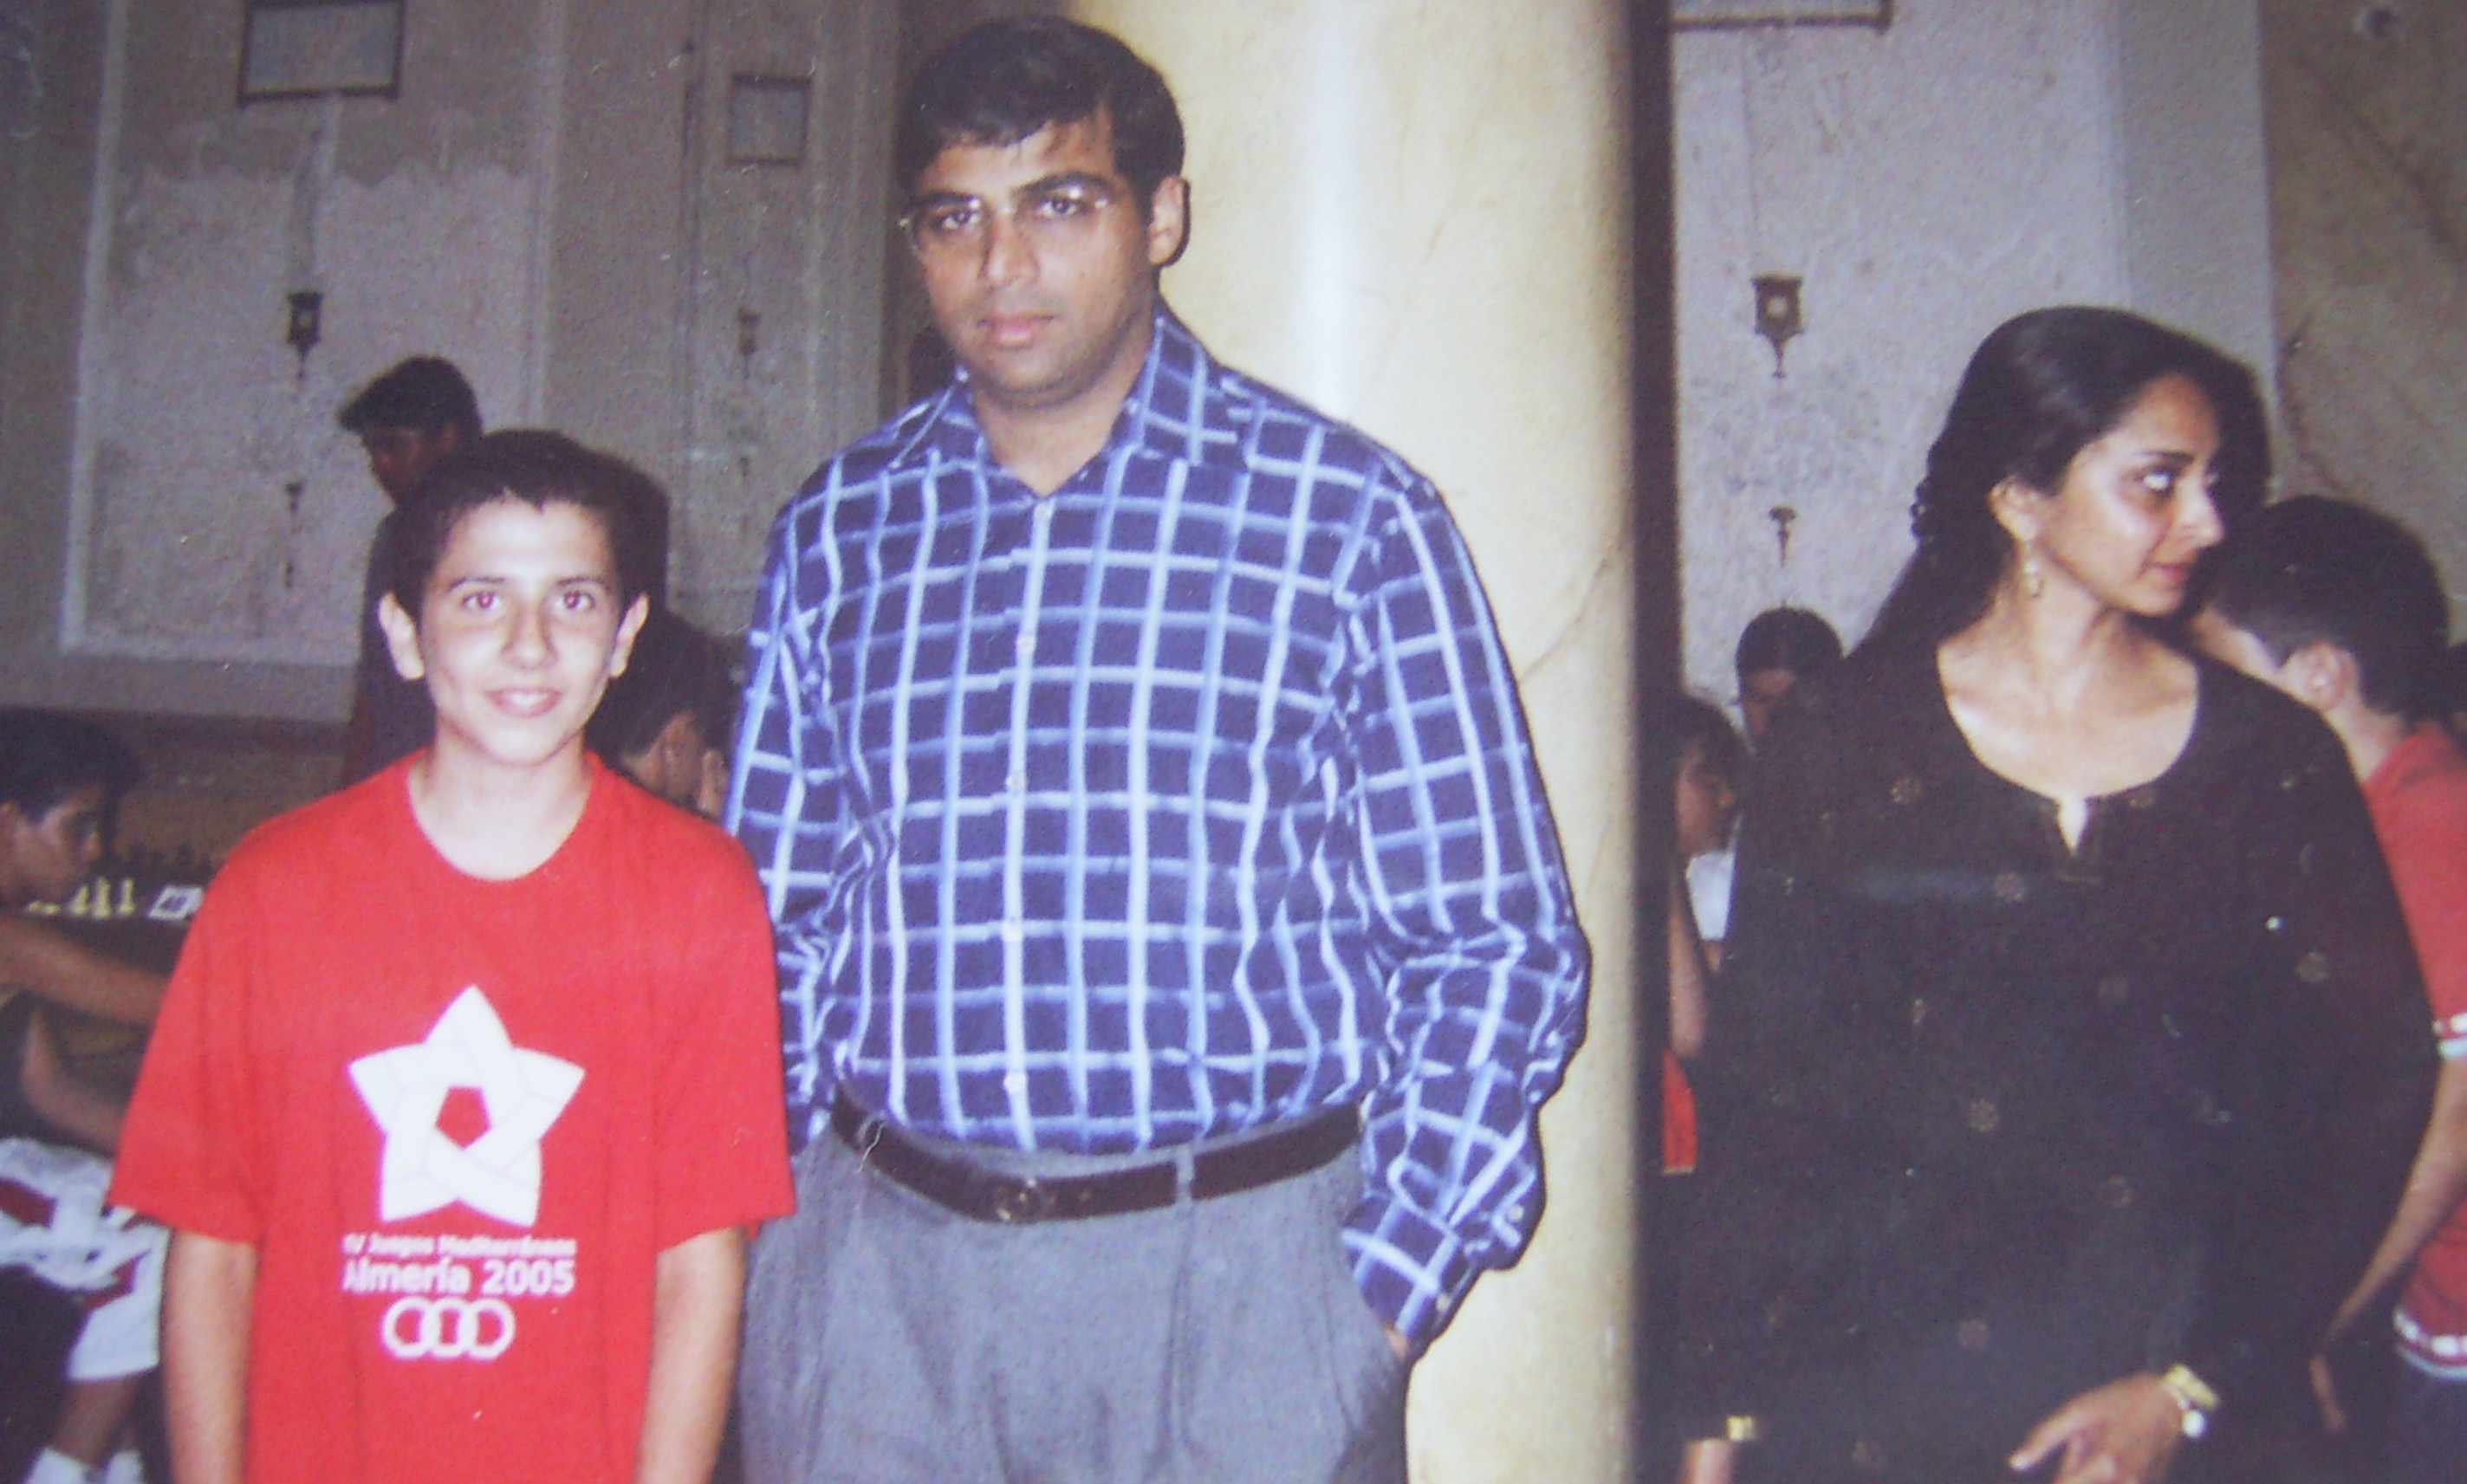 With former World Chess Champion Viswanathan Anand.